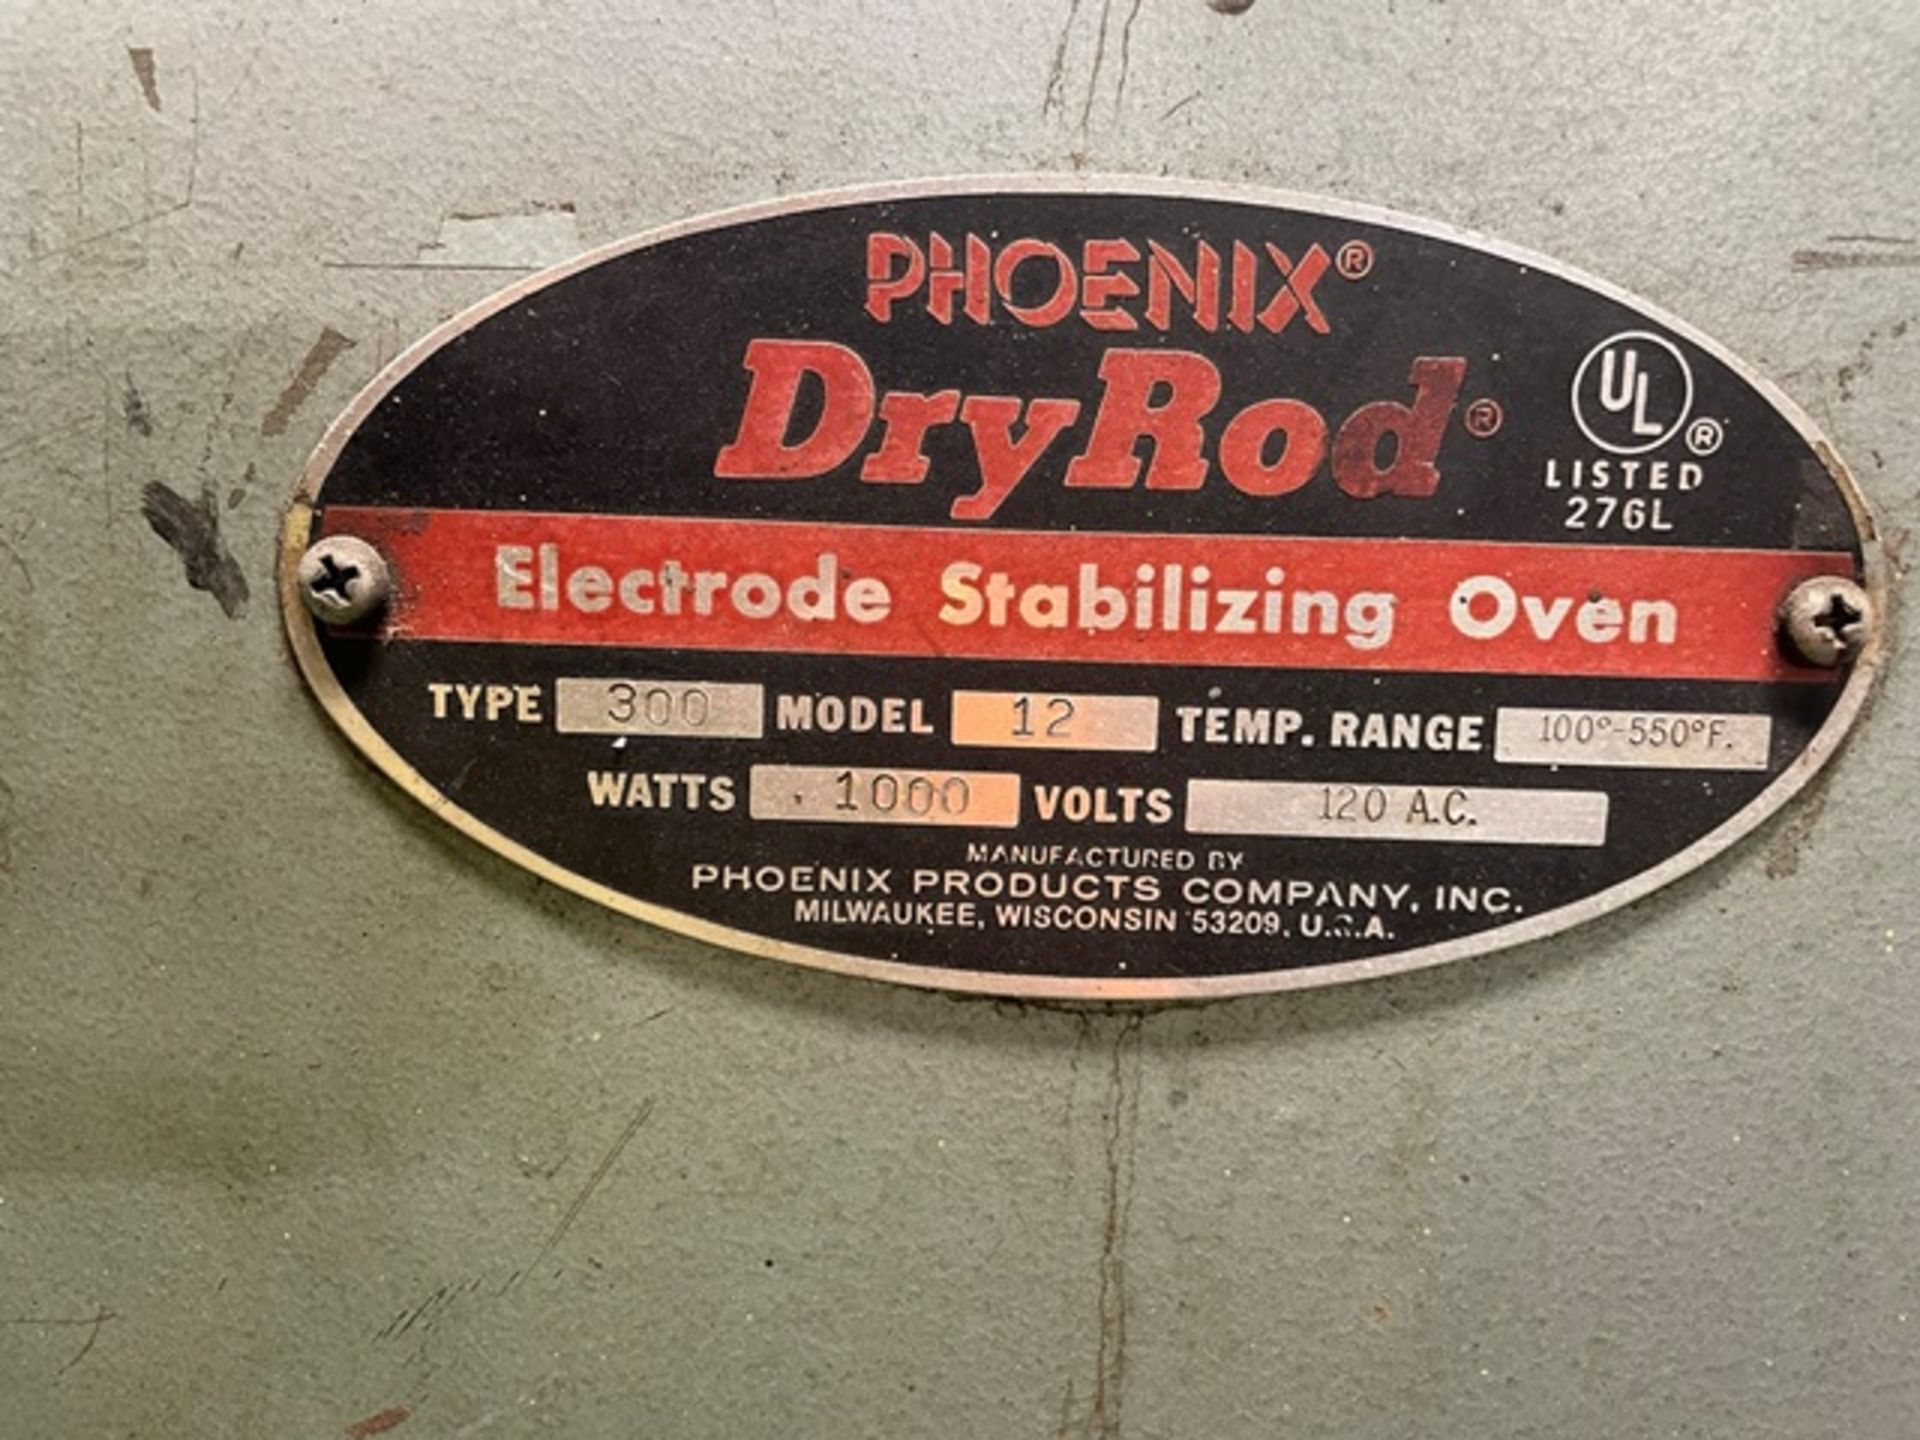 Phoenix DryRod Type 300 Oven, Rigging & Loading Fee: $125 - Image 2 of 3